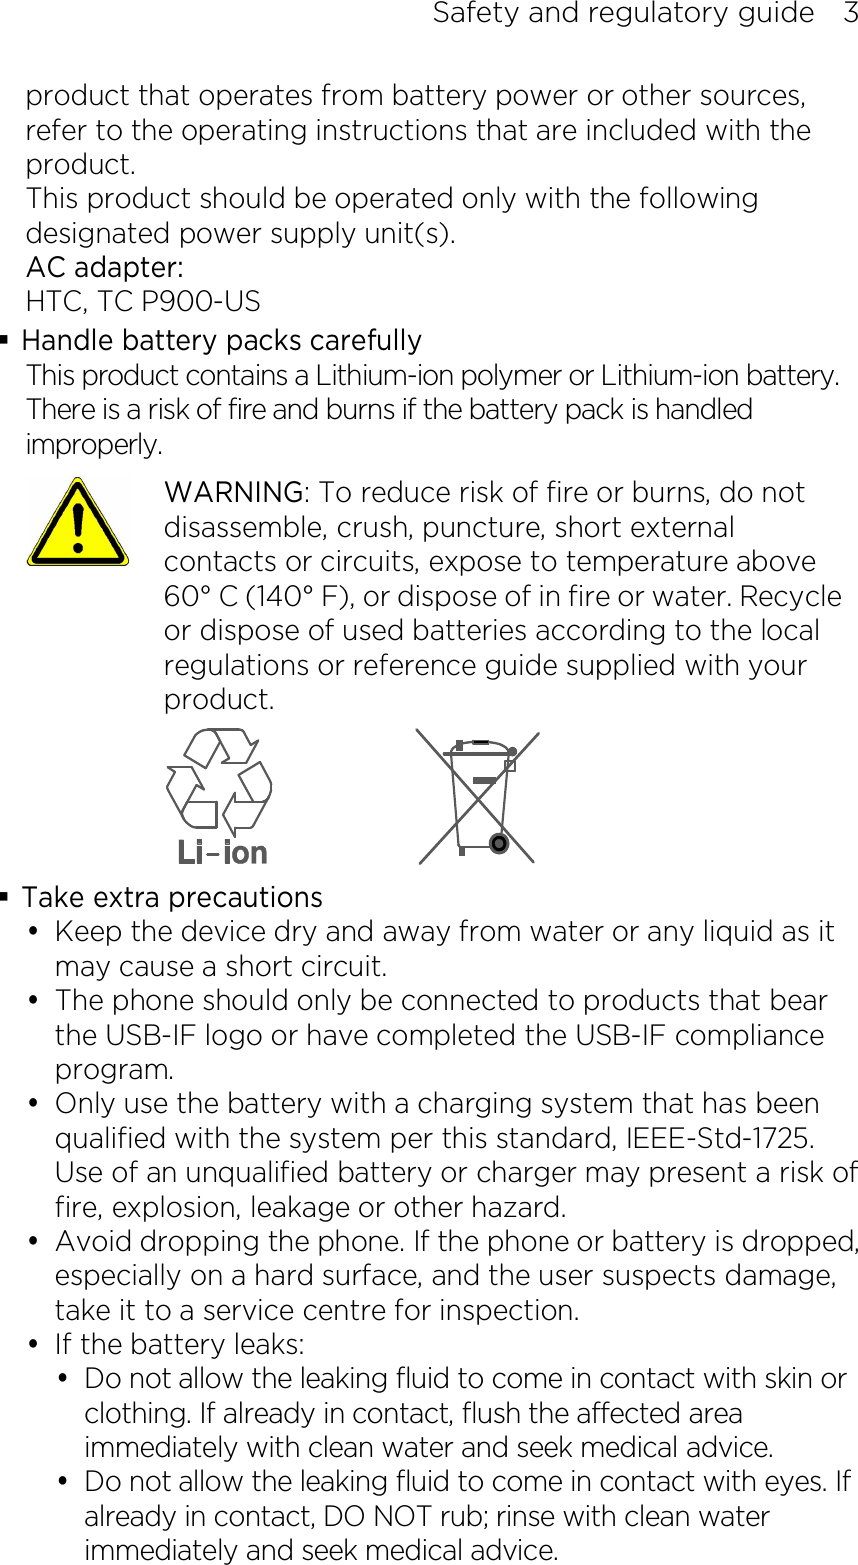 Safety and regulatory guide    3 product that operates from battery power or other sources, refer to the operating instructions that are included with the product. This product should be operated only with the following designated power supply unit(s). AC adapter: HTC, TC P900-US  Handle battery packs carefully This product contains a Lithium-ion polymer or Lithium-ion battery. There is a risk of fire and burns if the battery pack is handled improperly.    WARNING: To reduce risk of fire or burns, do not disassemble, crush, puncture, short external contacts or circuits, expose to temperature above 60° C (140° F), or dispose of in fire or water. Recycle or dispose of used batteries according to the local regulations or reference guide supplied with your product.   Take extra precautions  Keep the device dry and away from water or any liquid as it may cause a short circuit.    The phone should only be connected to products that bear the USB-IF logo or have completed the USB-IF compliance program.  Only use the battery with a charging system that has been qualified with the system per this standard, IEEE-Std-1725. Use of an unqualified battery or charger may present a risk of fire, explosion, leakage or other hazard.  Avoid dropping the phone. If the phone or battery is dropped, especially on a hard surface, and the user suspects damage, take it to a service centre for inspection.  If the battery leaks:    Do not allow the leaking fluid to come in contact with skin or clothing. If already in contact, flush the affected area immediately with clean water and seek medical advice.    Do not allow the leaking fluid to come in contact with eyes. If already in contact, DO NOT rub; rinse with clean water immediately and seek medical advice.   